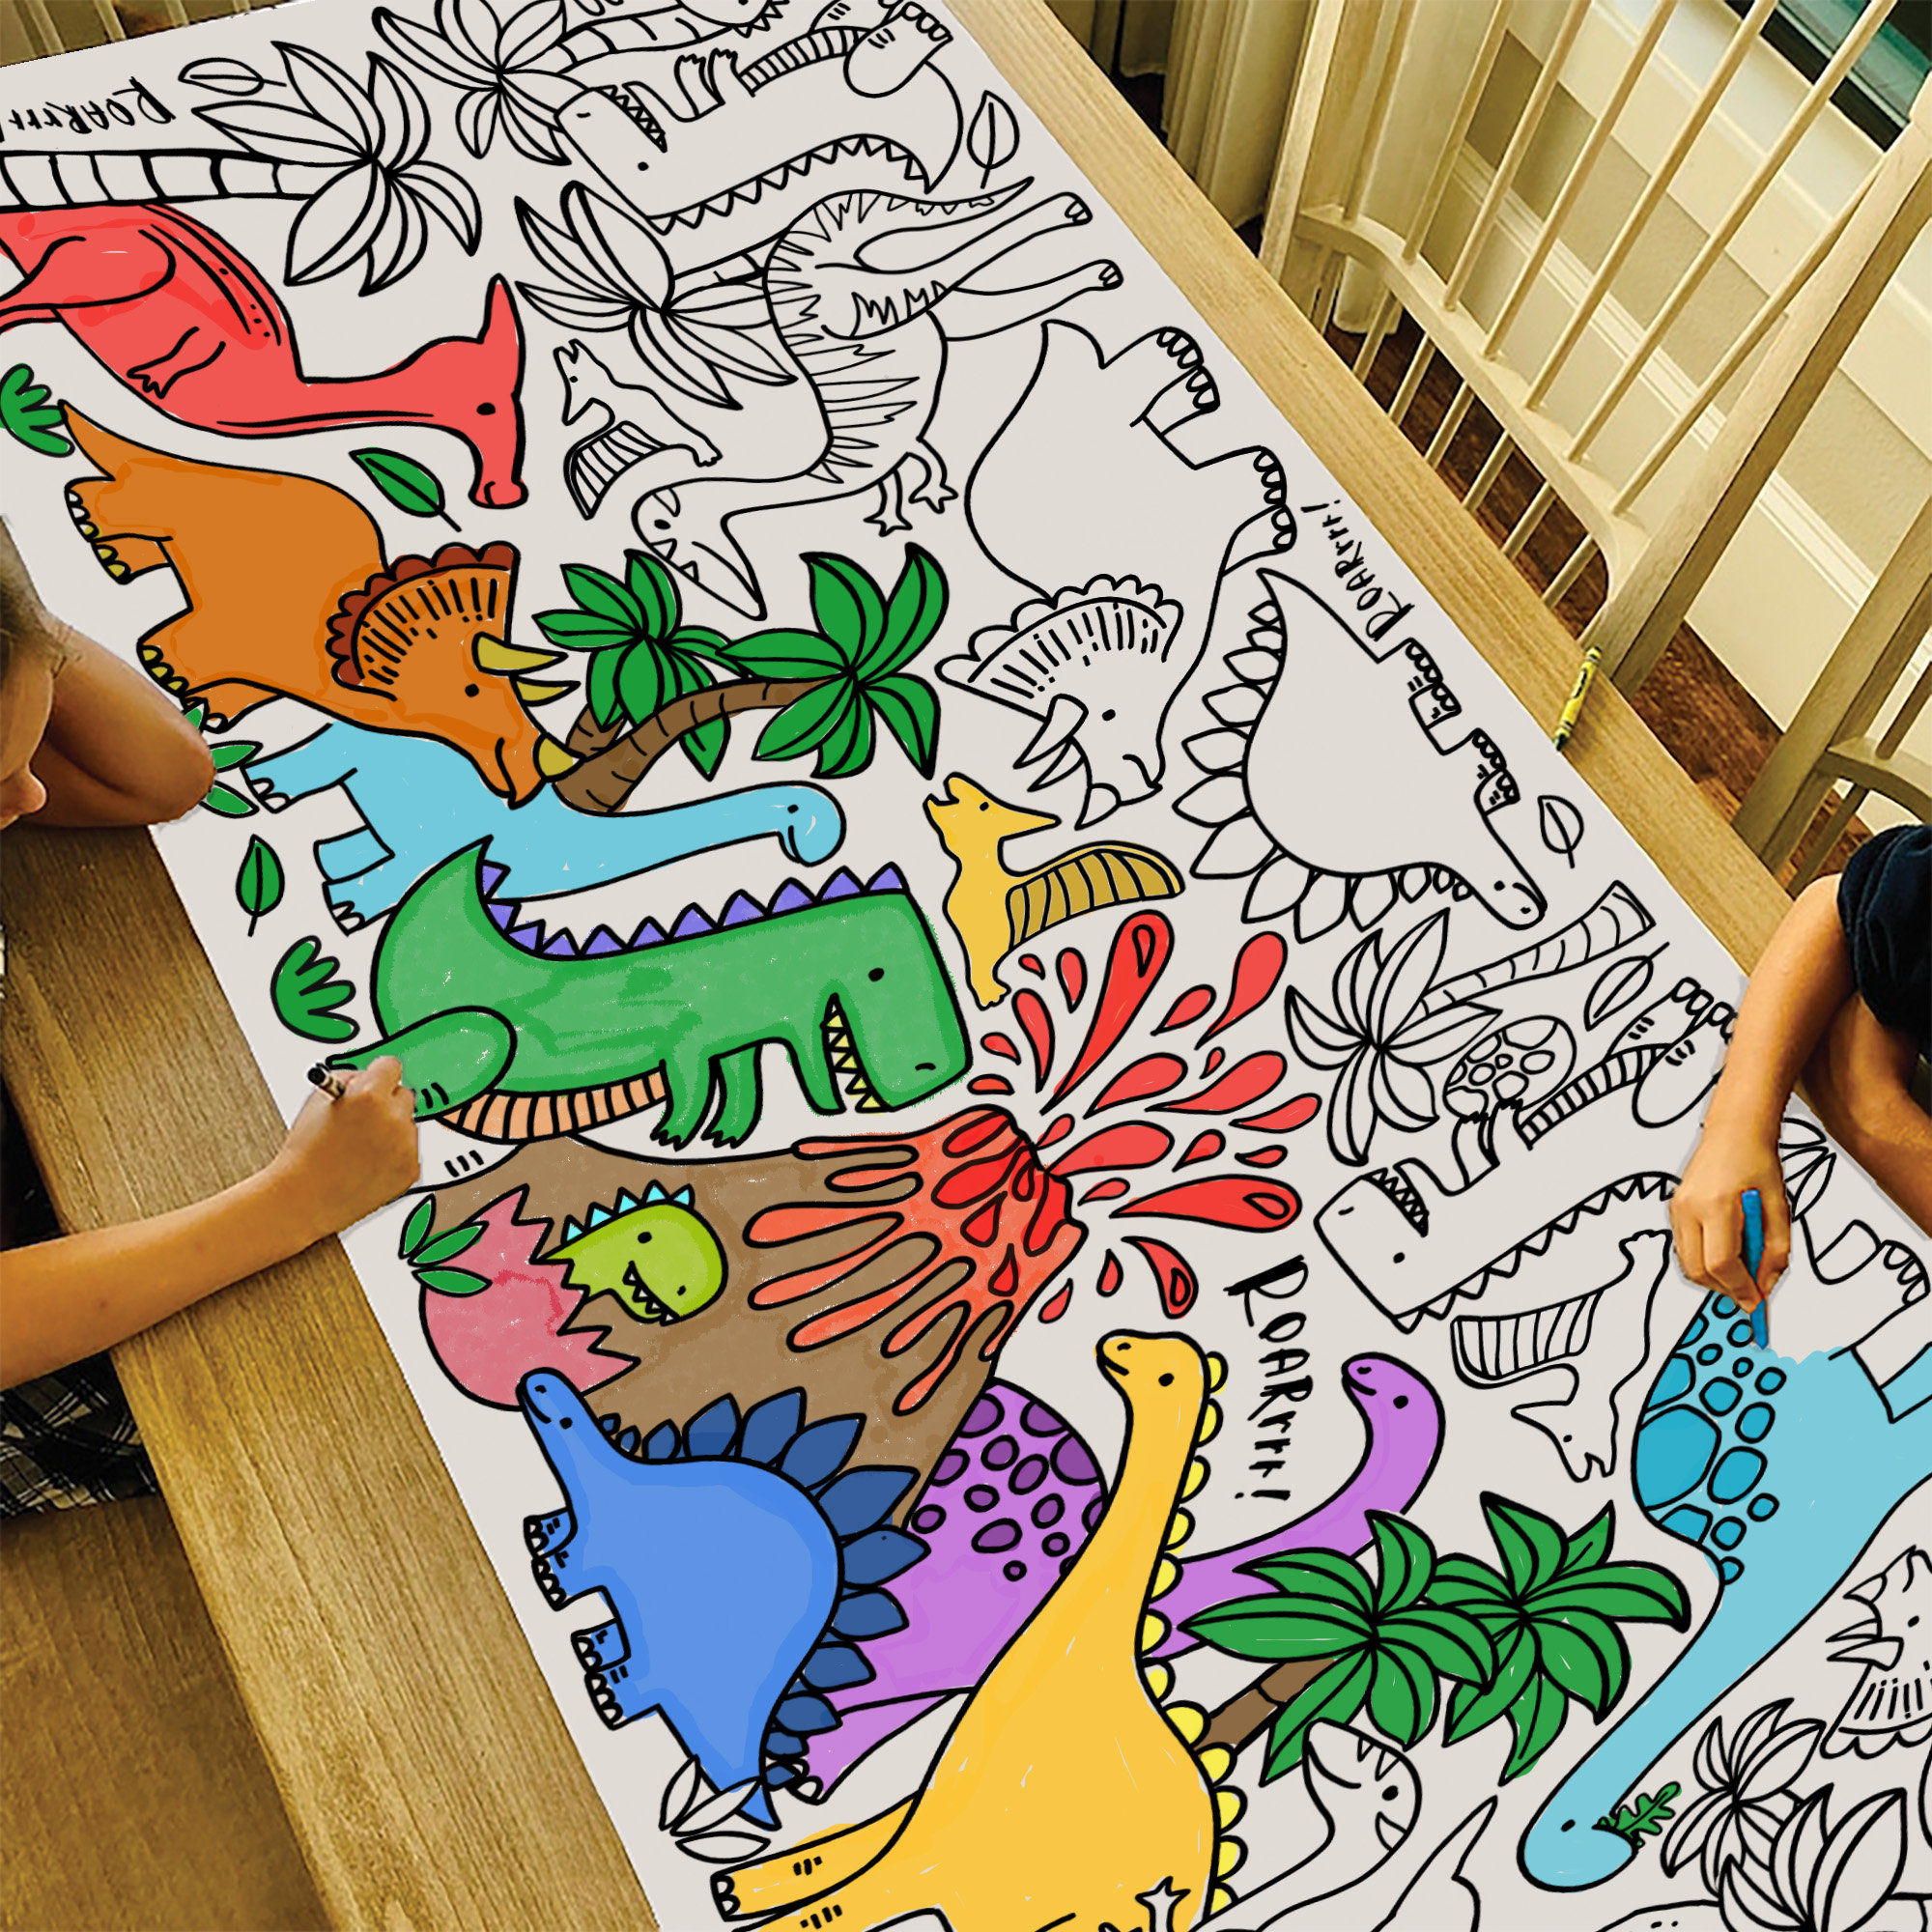 Funrous Dinosaur Jumbo Giant Coloring Poster for Kids 45 x 31.5 Inch Table  Wall Coloring Pages Sauropoda Animals Huge Coloring Paper Large Coloring